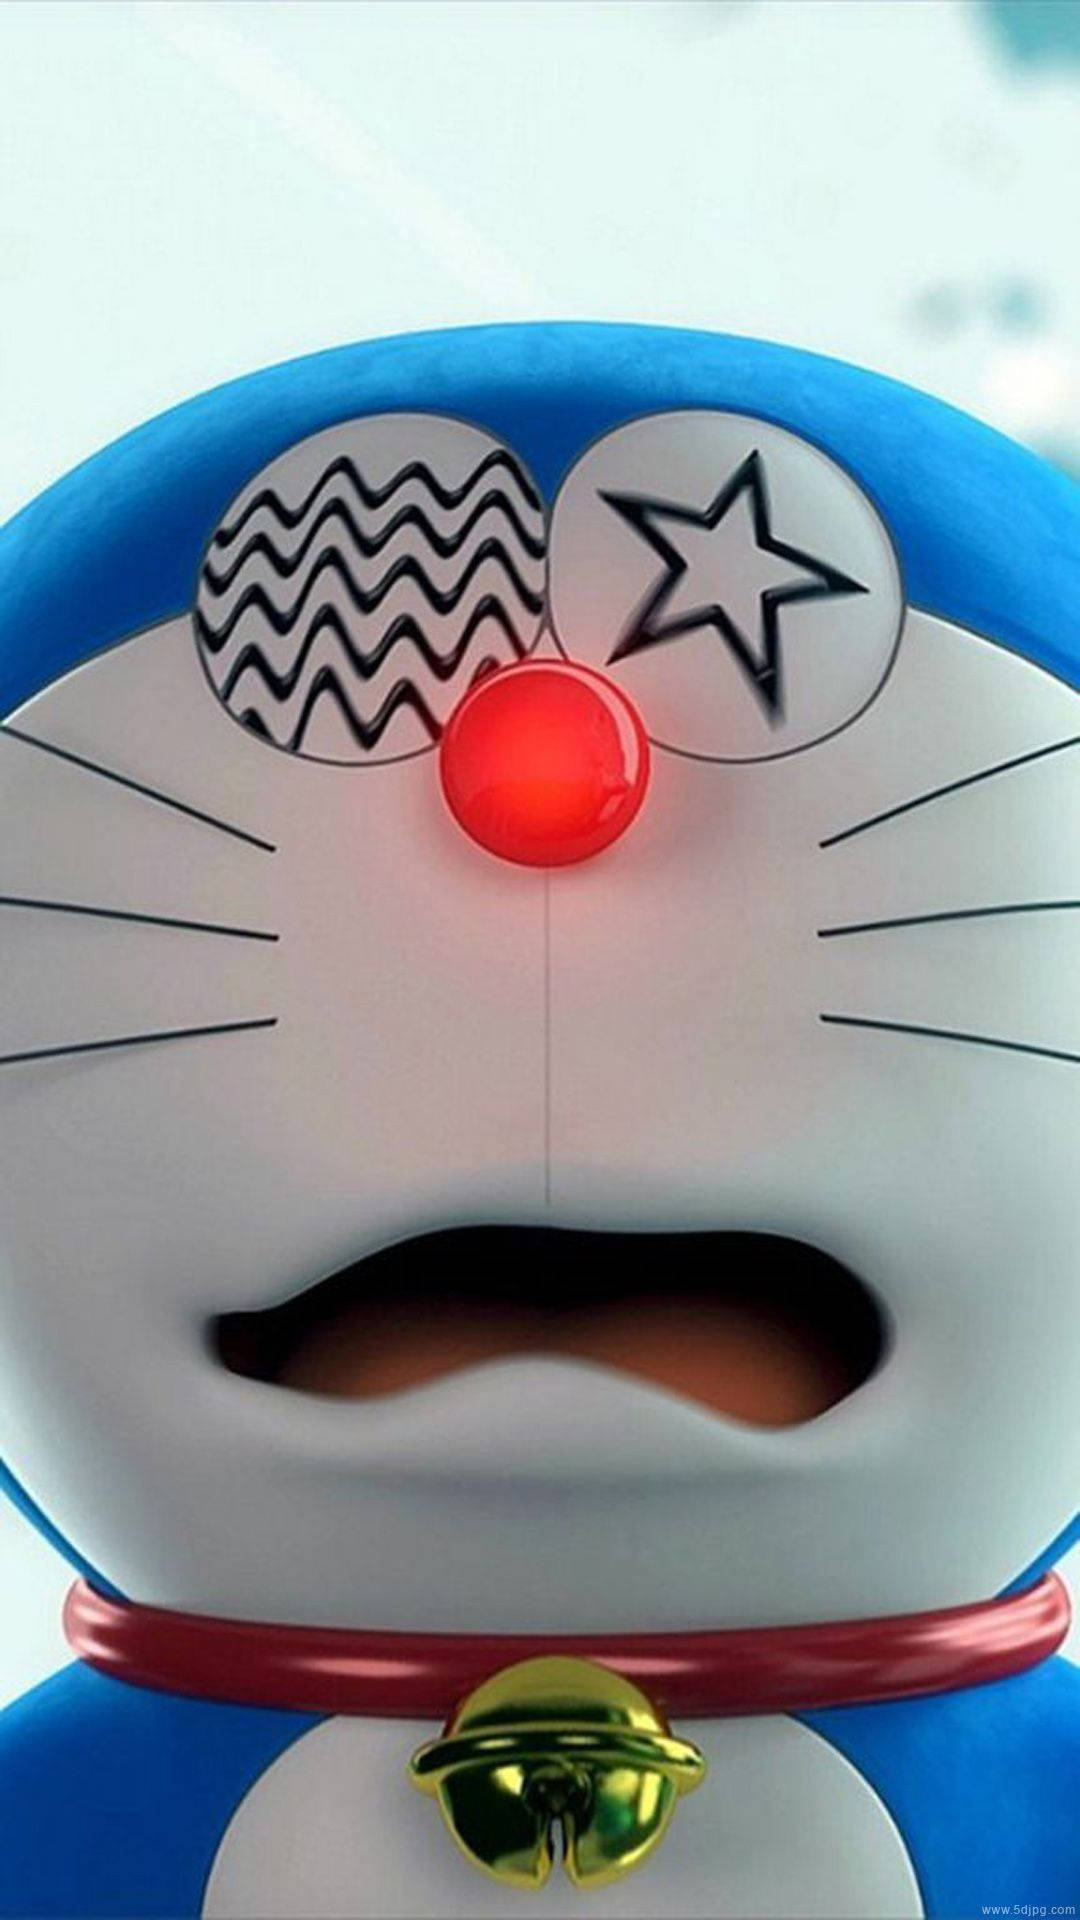 Stand By Me Dizzy Doraemon iPhone Wallpaper